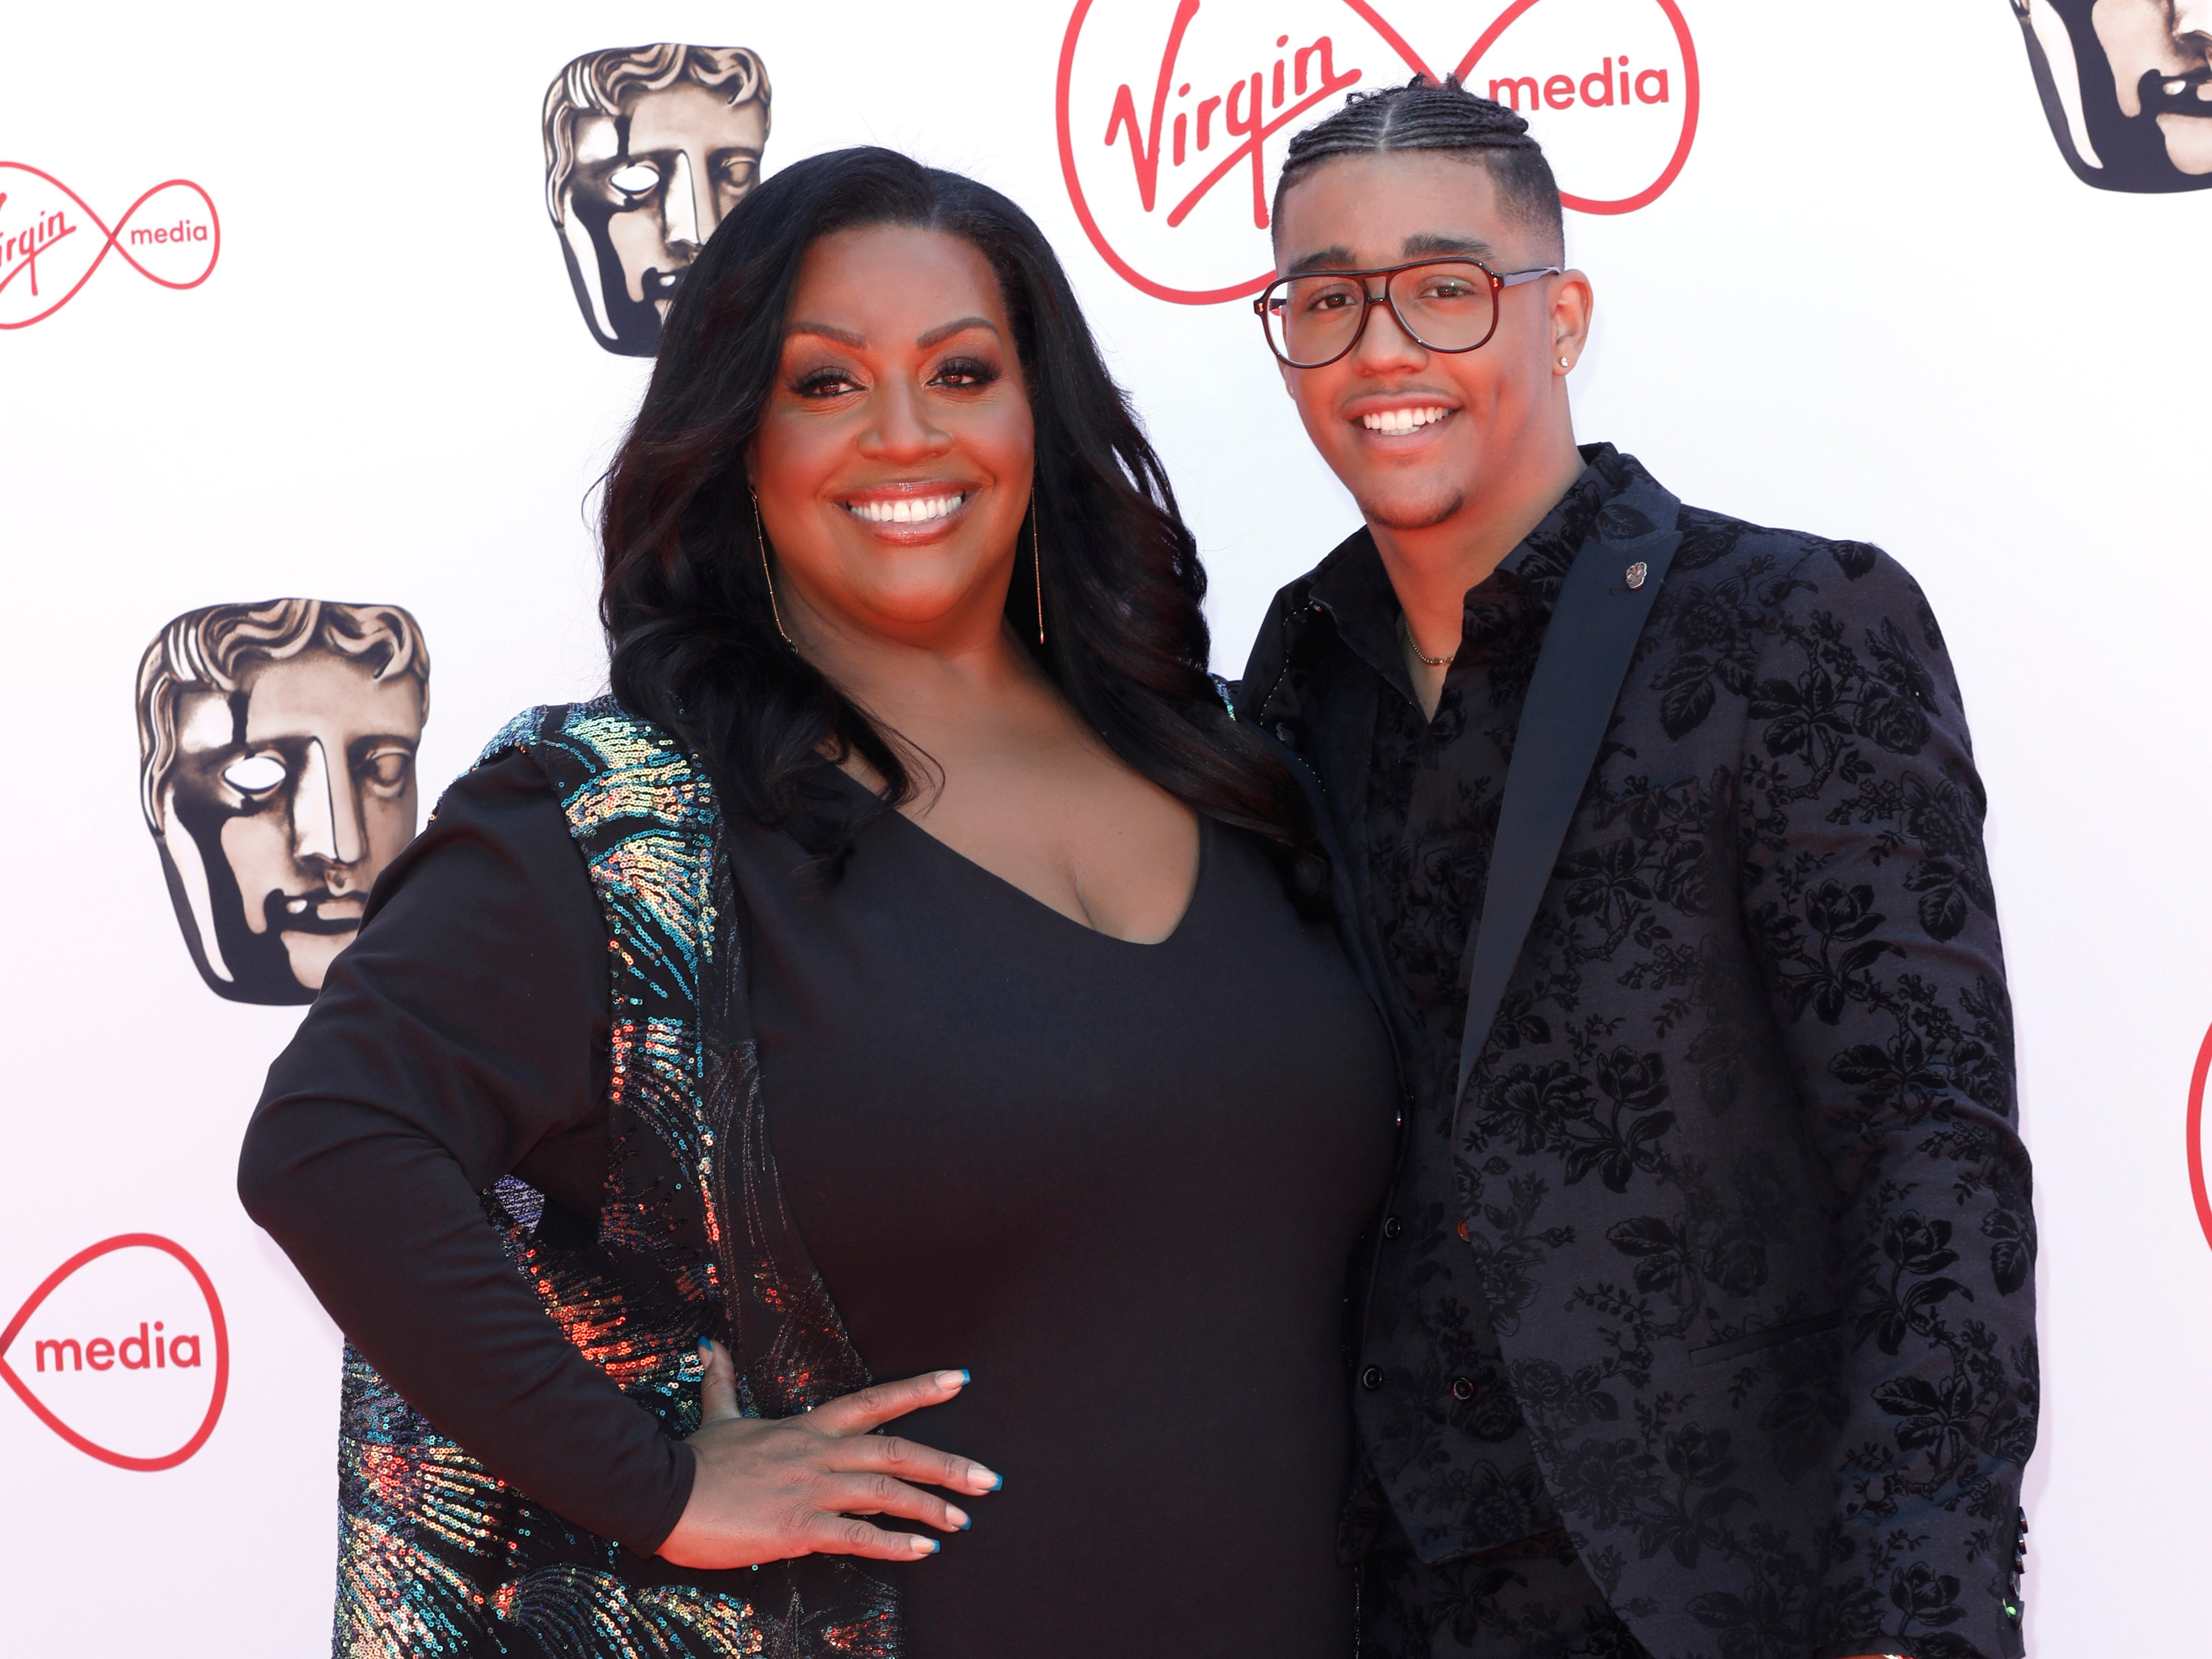 Alison Hammond and Aiden Hammond attend the Virgin Media British Academy Television Awards at The Royal Festival Hall on May 08, 2022